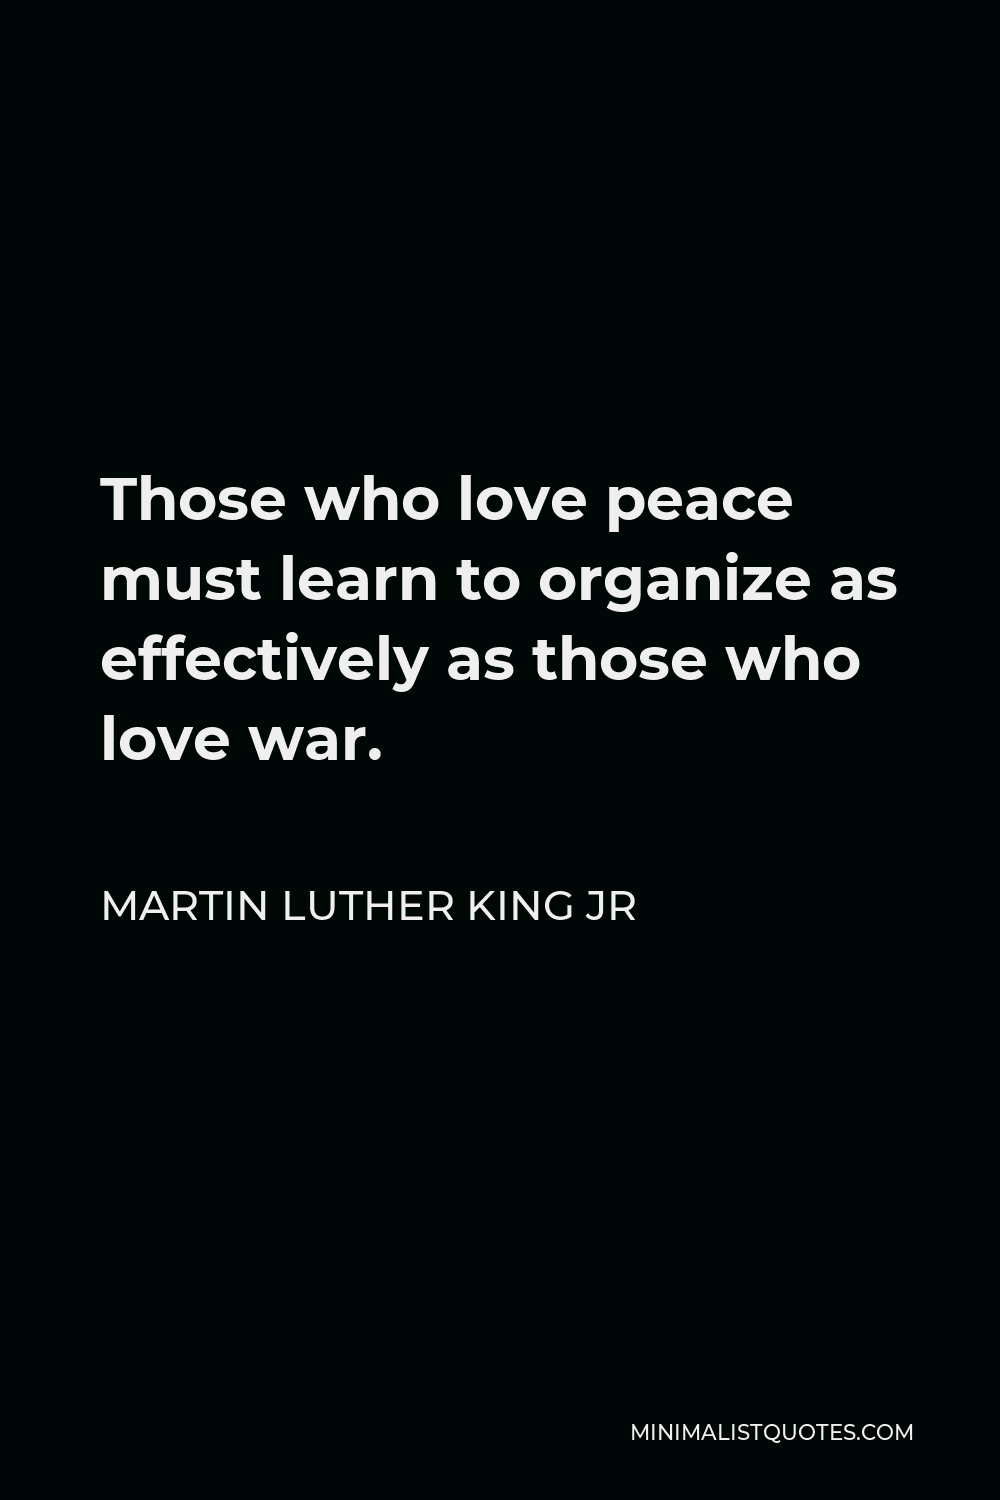 Martin Luther King Jr Quote - Those who love peace must learn to organize as effectively as those who love war.